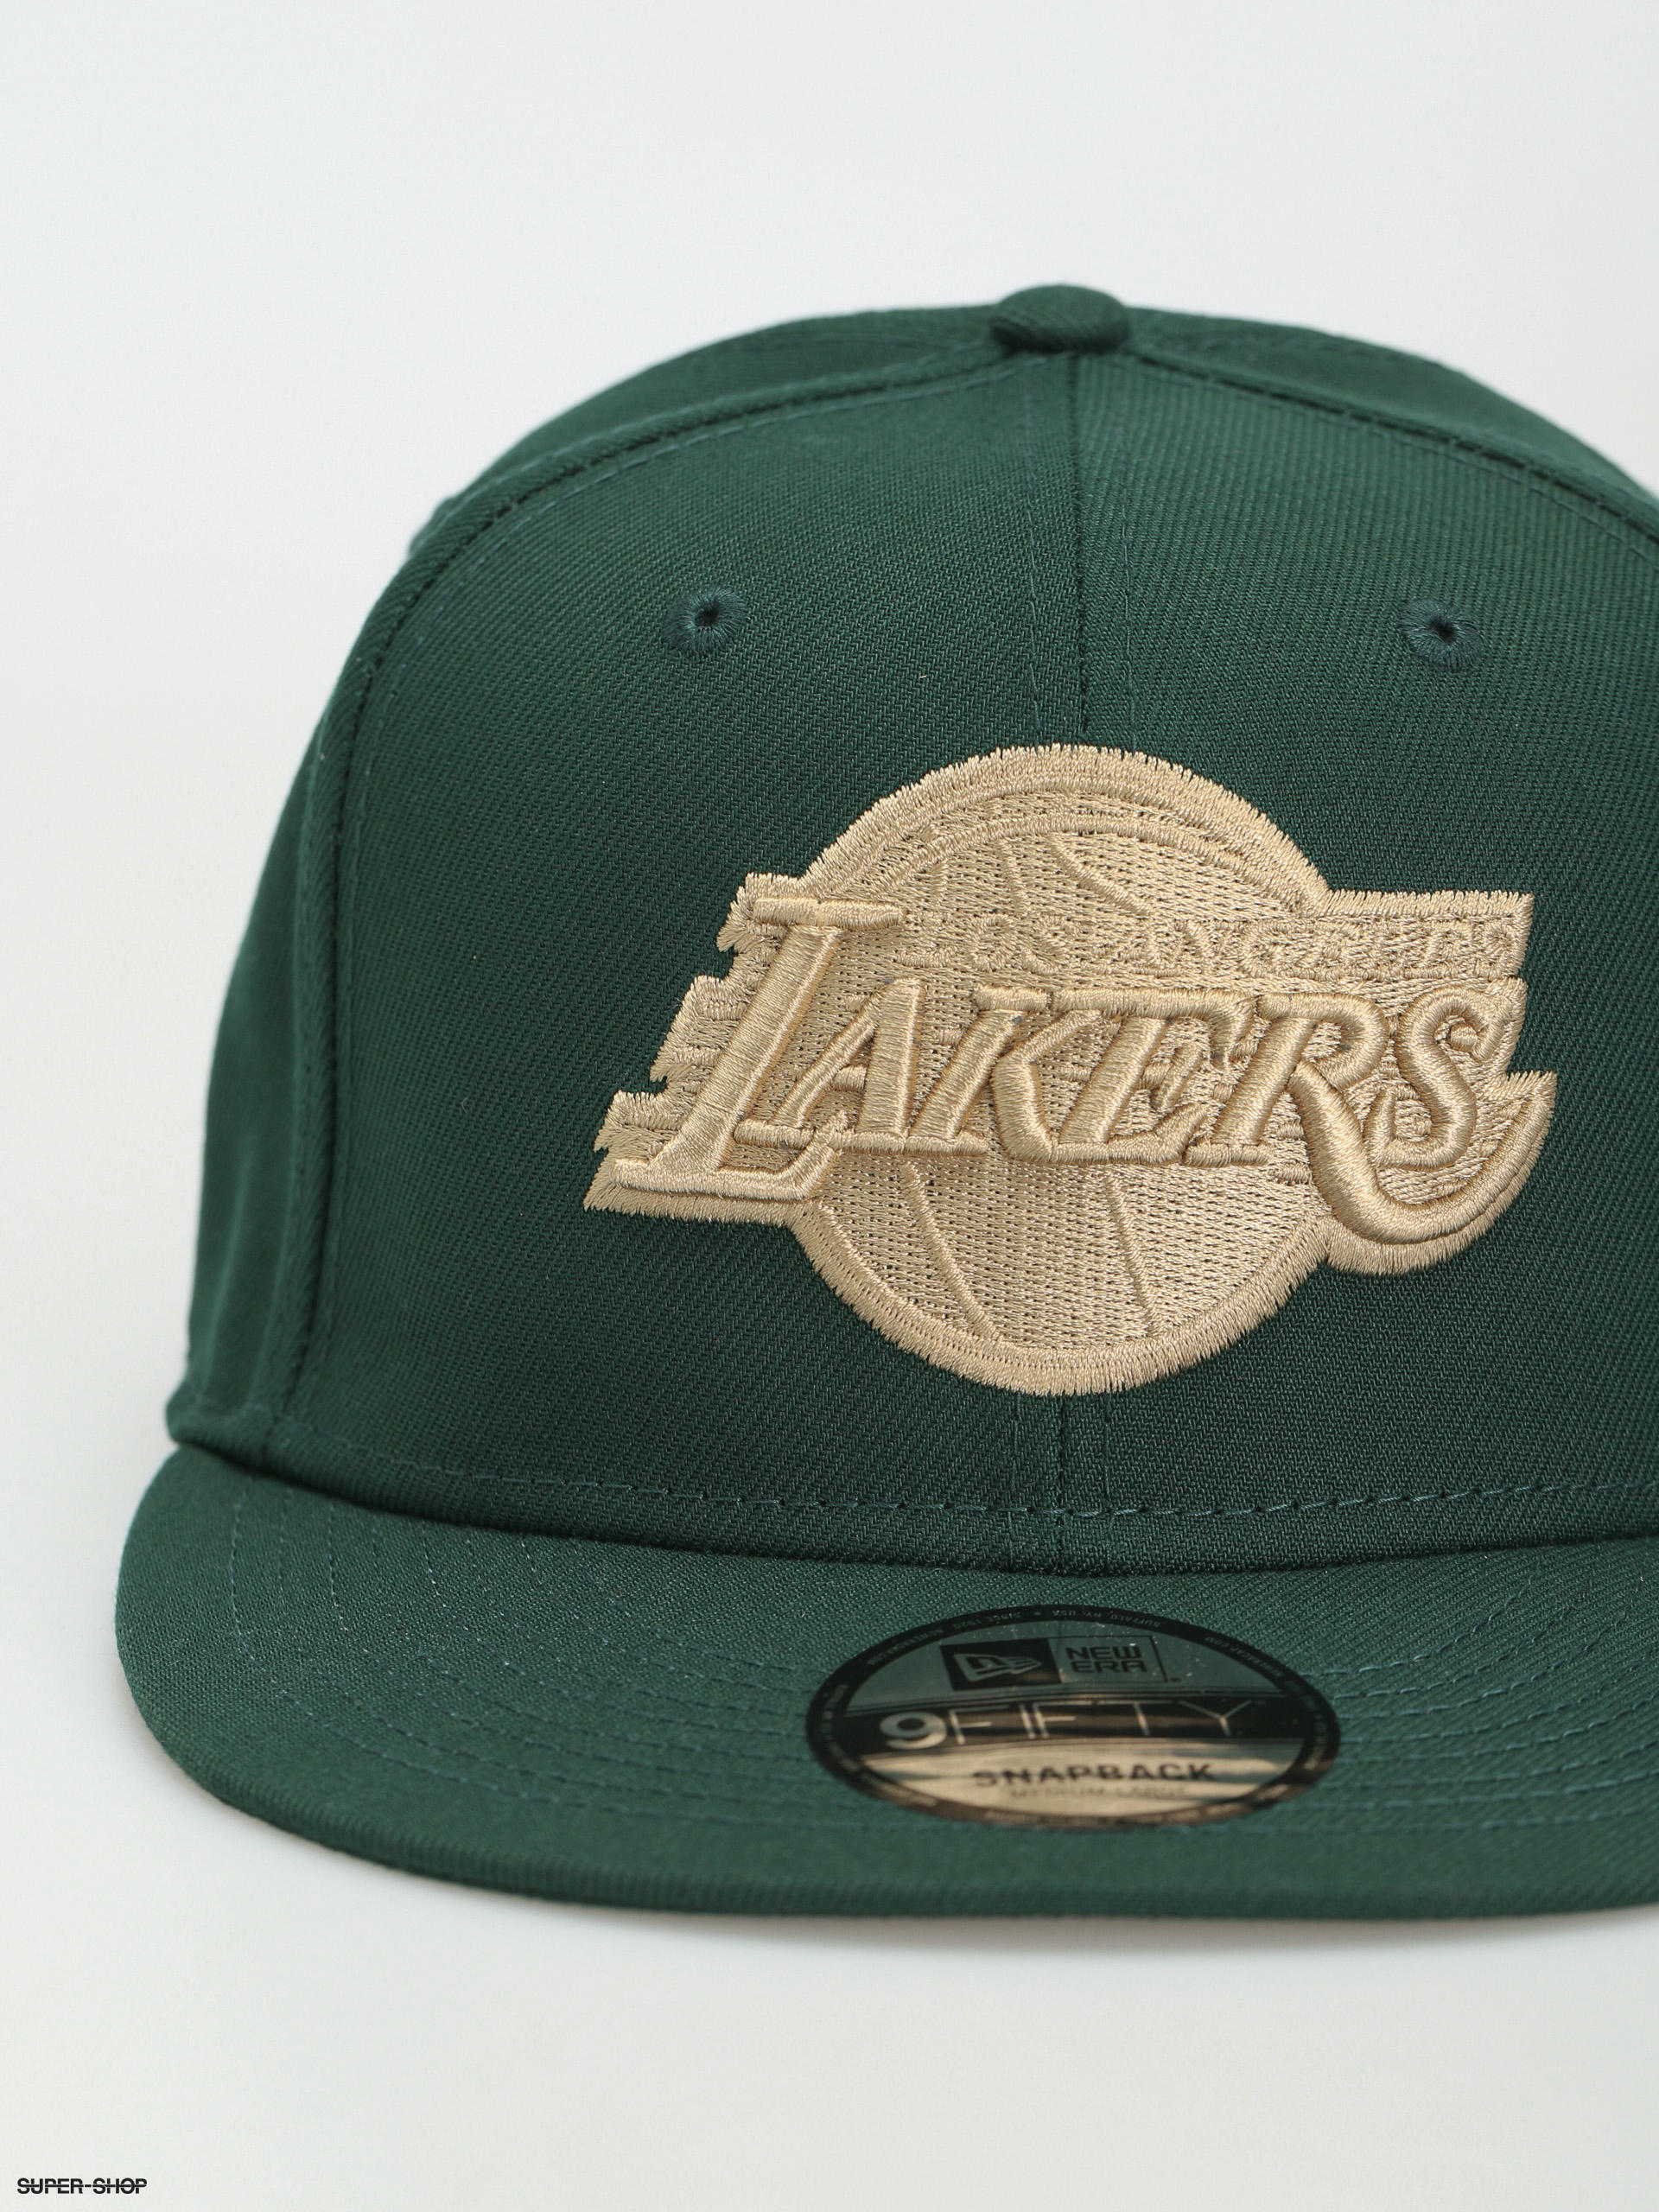 Lids Los Angeles Lakers New Era 9FIFTY Hat - Yellow/Green